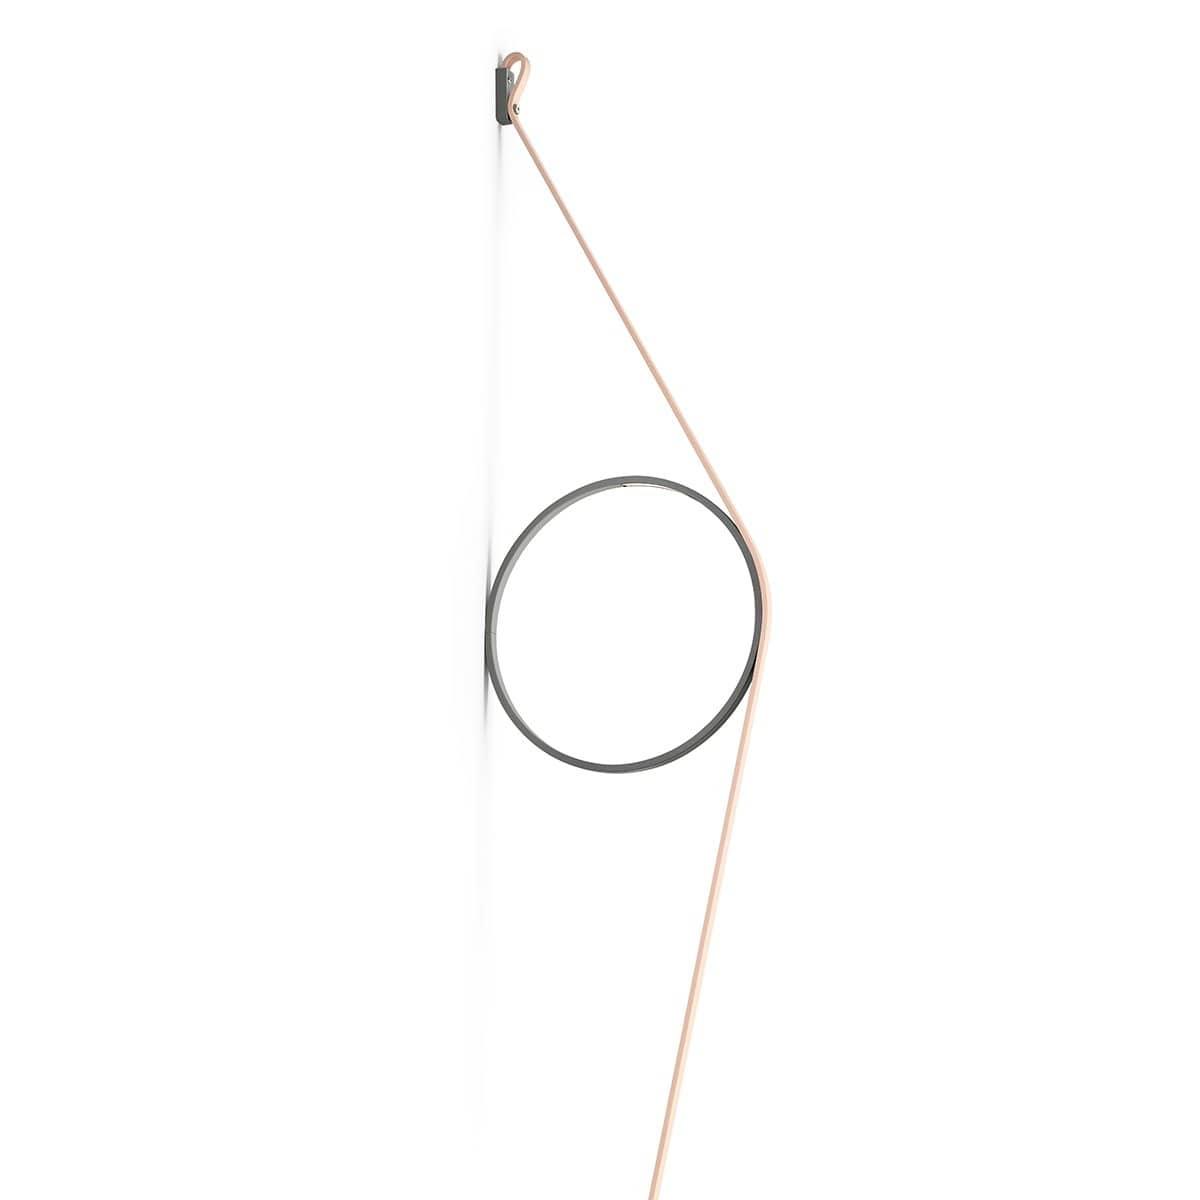 WireRing Wall Sconce Lamp - Curated - Lighting - Flos